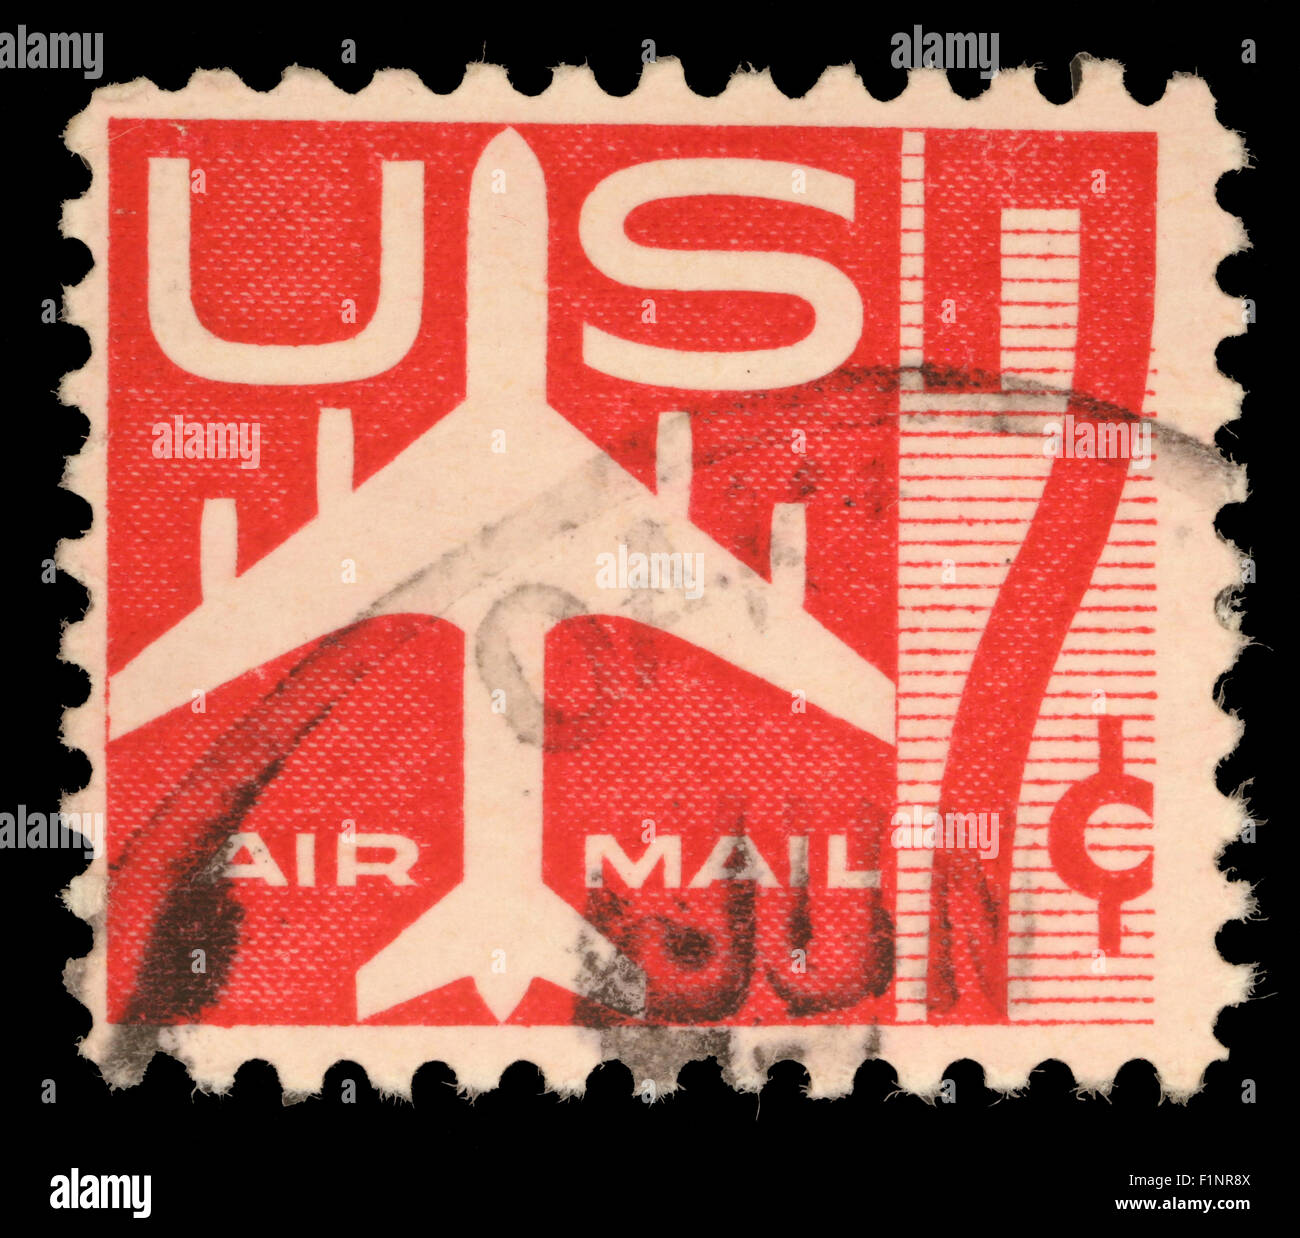 United States postage stamp in the value of 7c used for overseas air mail deliveries showing air mail symbols Stock Photo